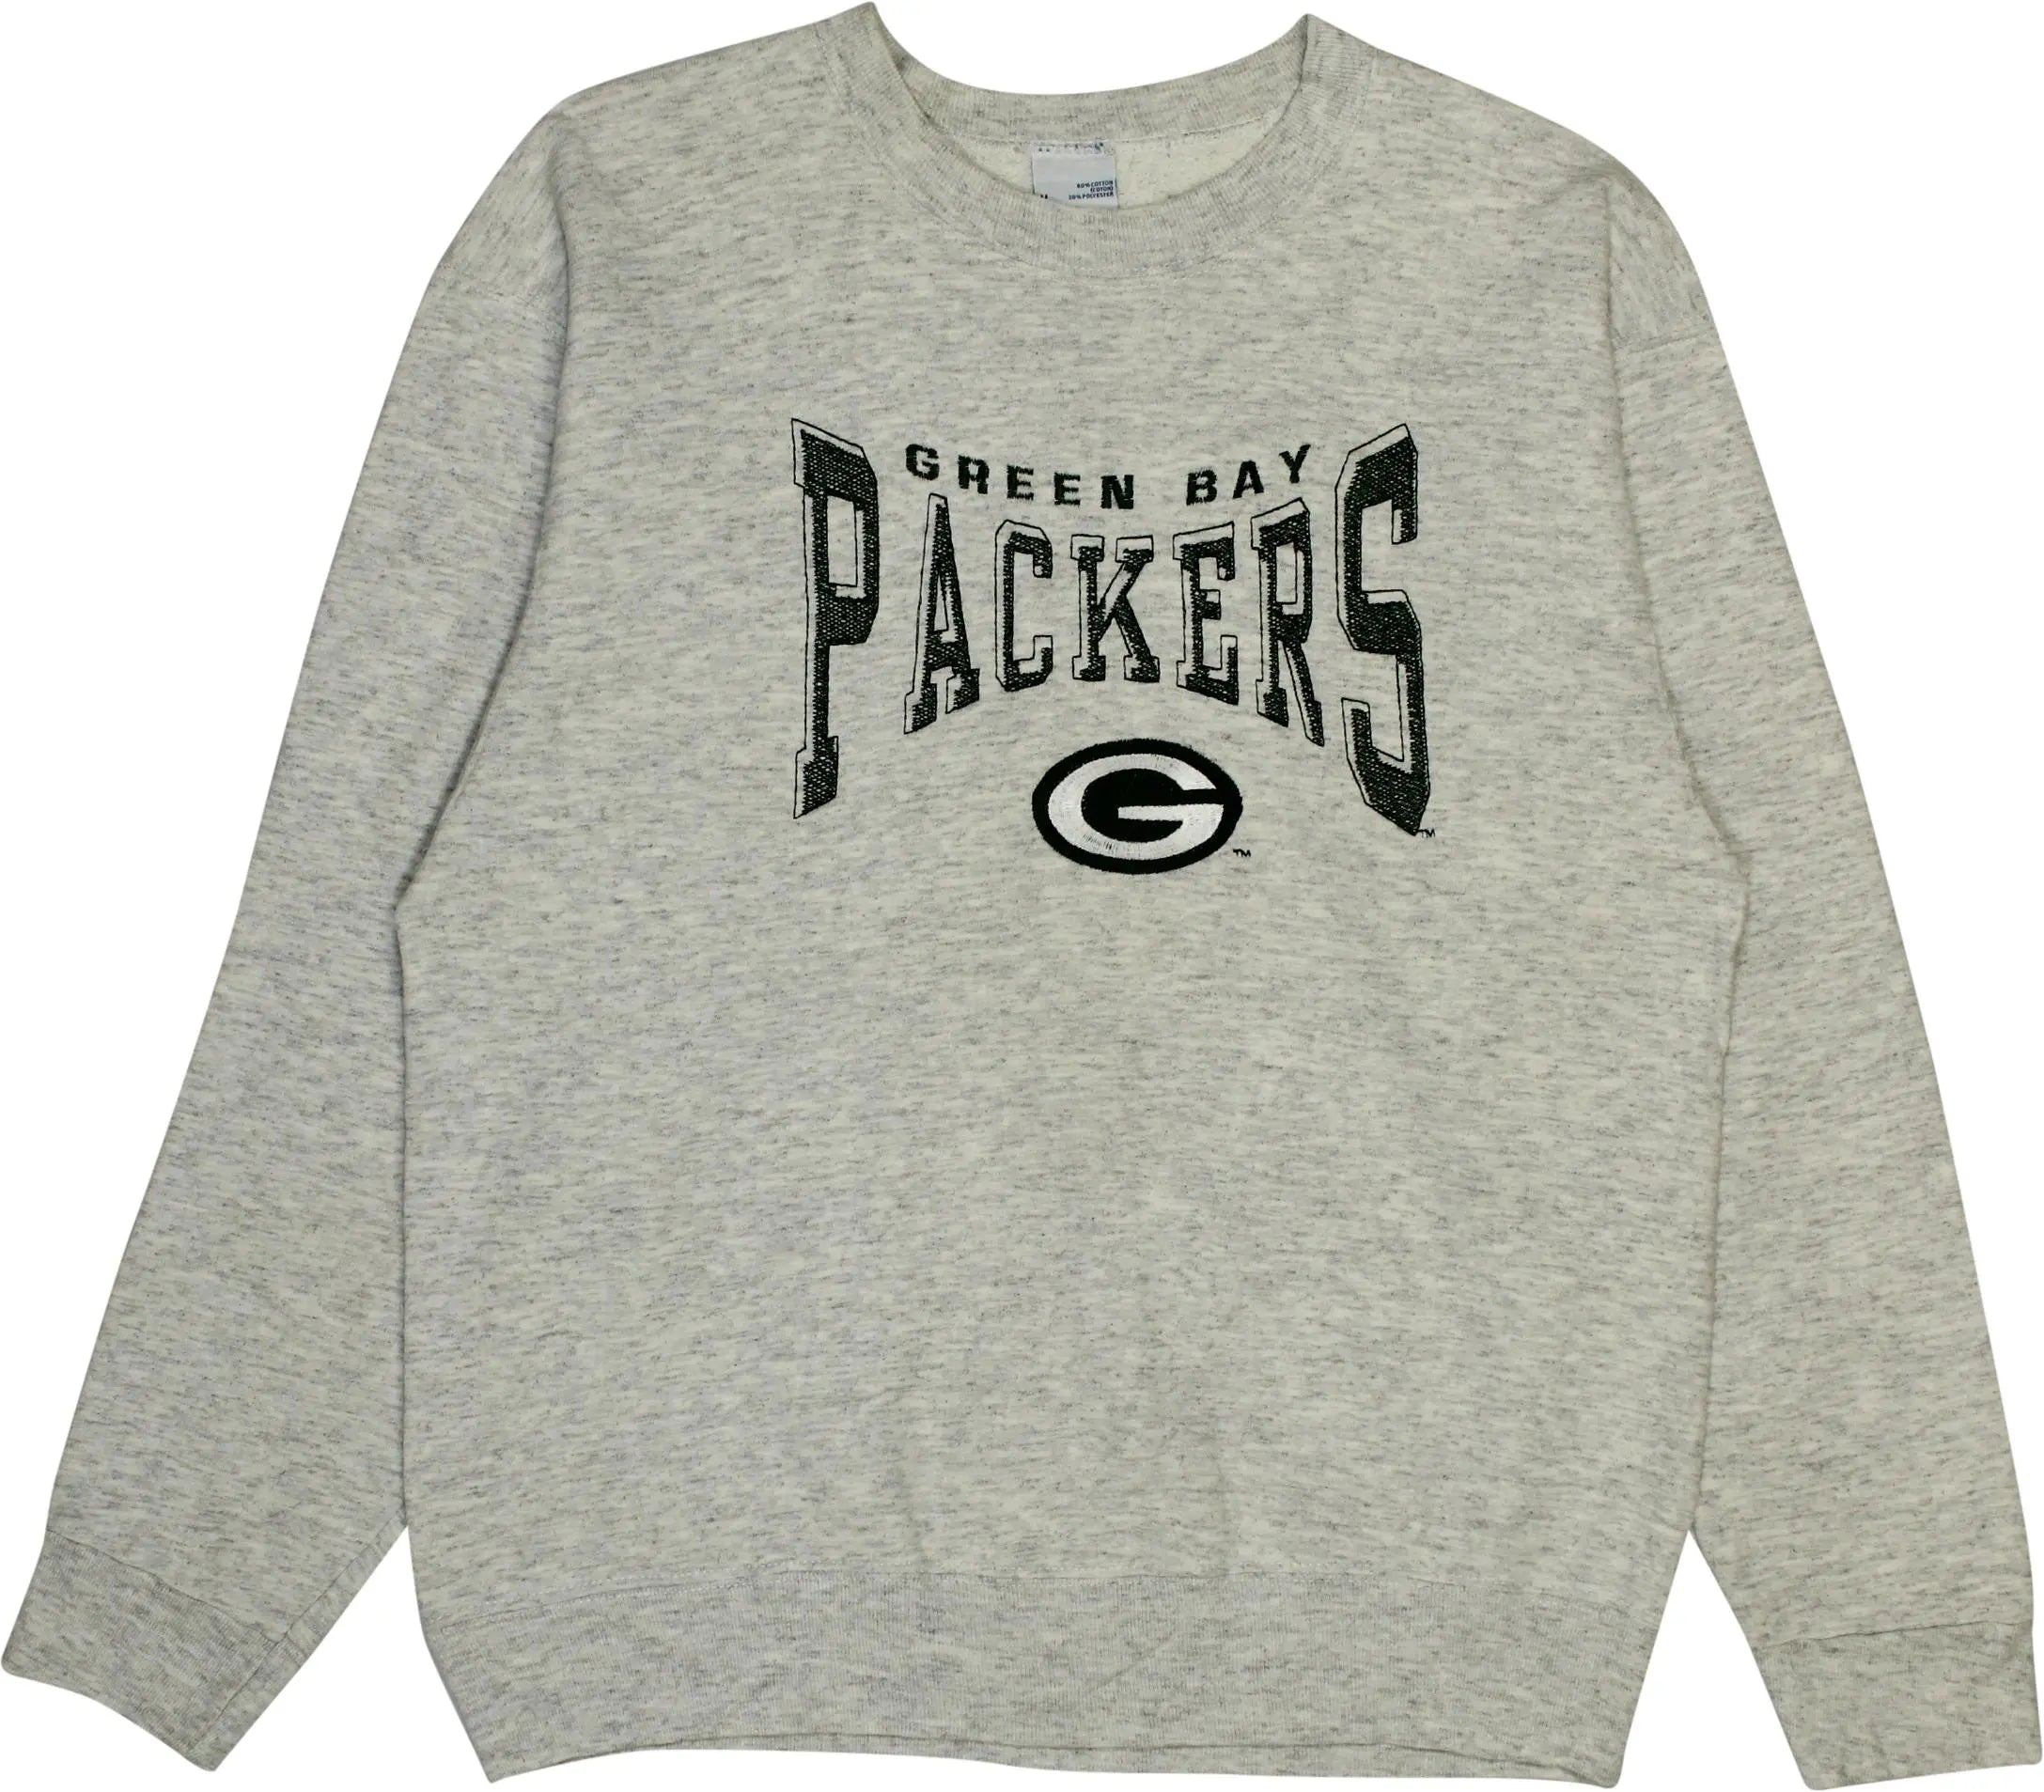 Salem - Grey Green Bay Packers Sweater- ThriftTale.com - Vintage and second handclothing